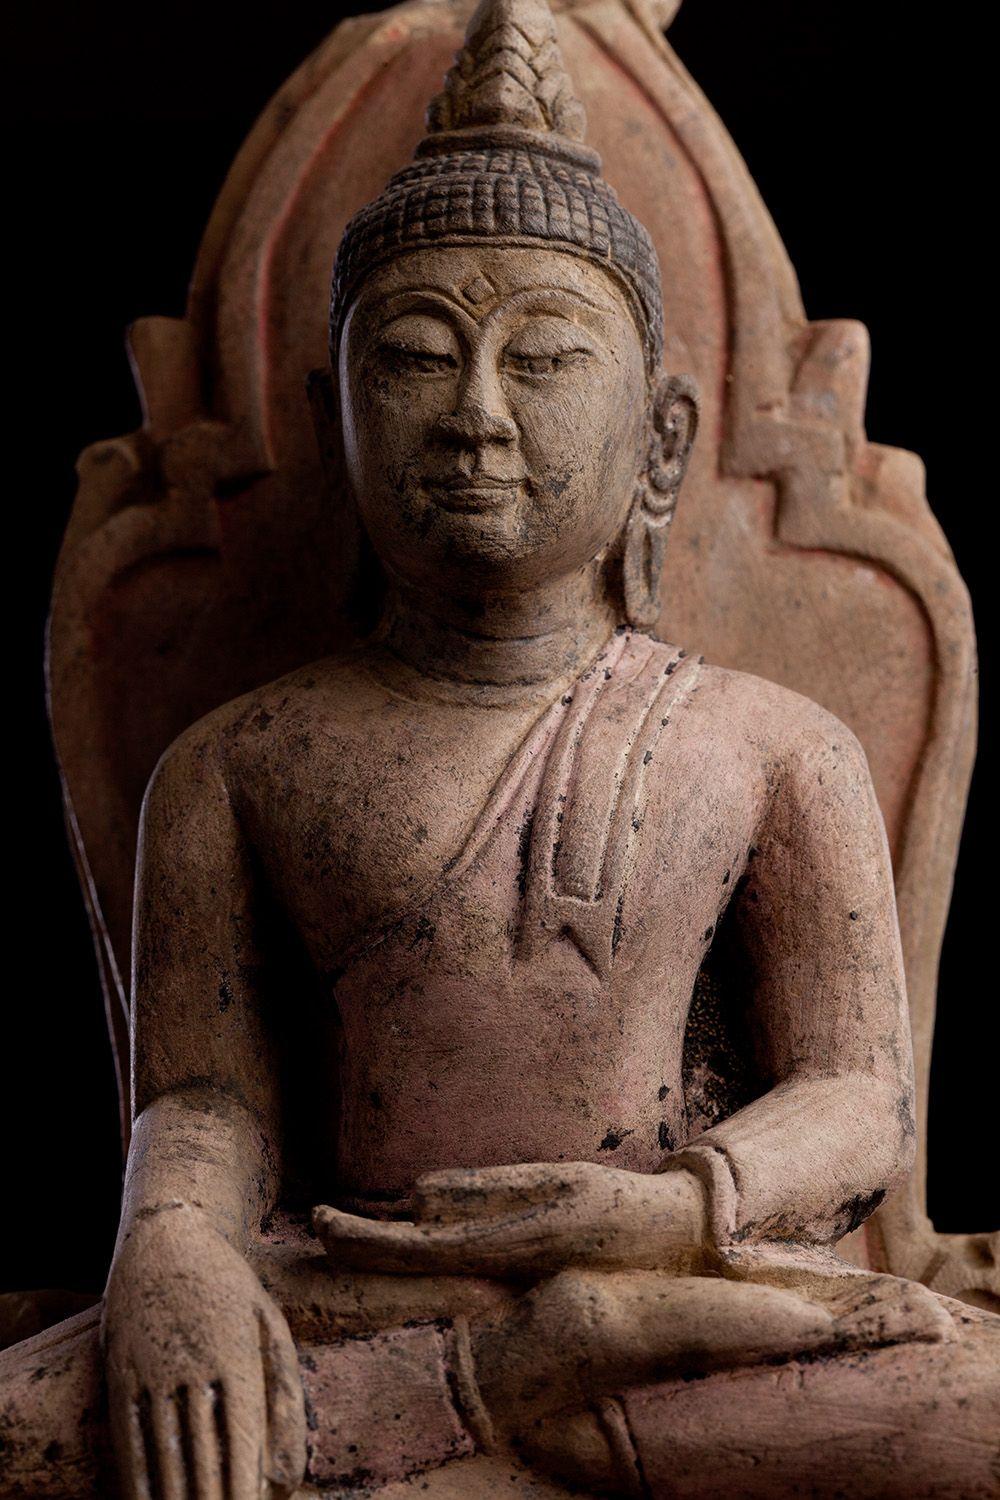 15thC Northern Thai stucco Buddha from a high-level Buddhist temple complex. Based on the superb condition of this delicate material it is likely from an inside part of a temple complex or from a protected interior courtyard. Very fine quality-